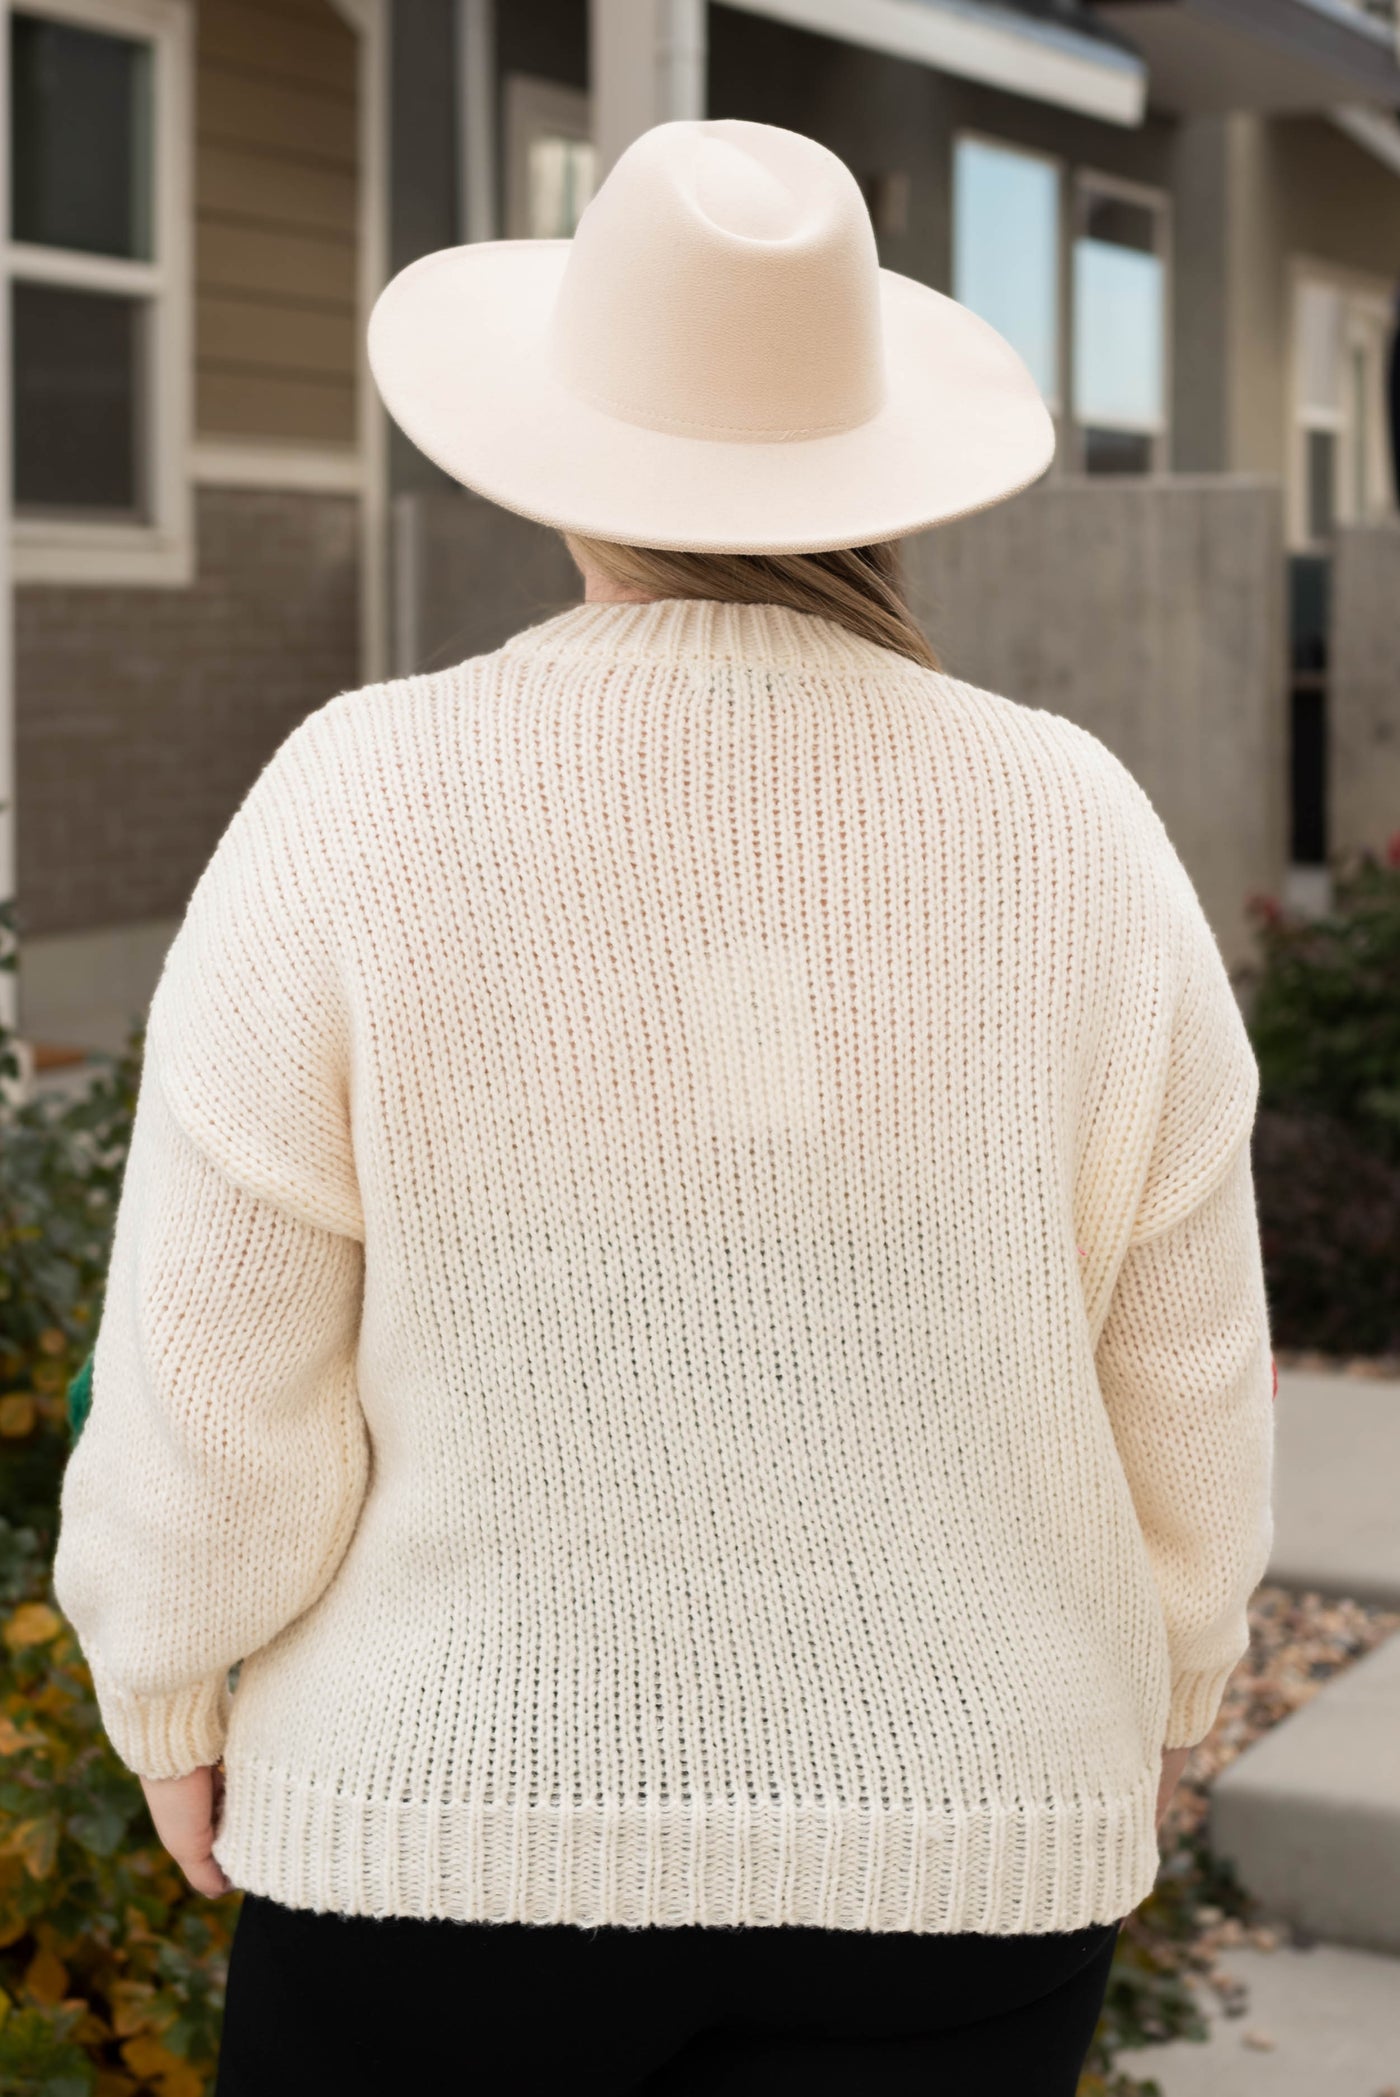 Back view of the plus size cream flower sweater